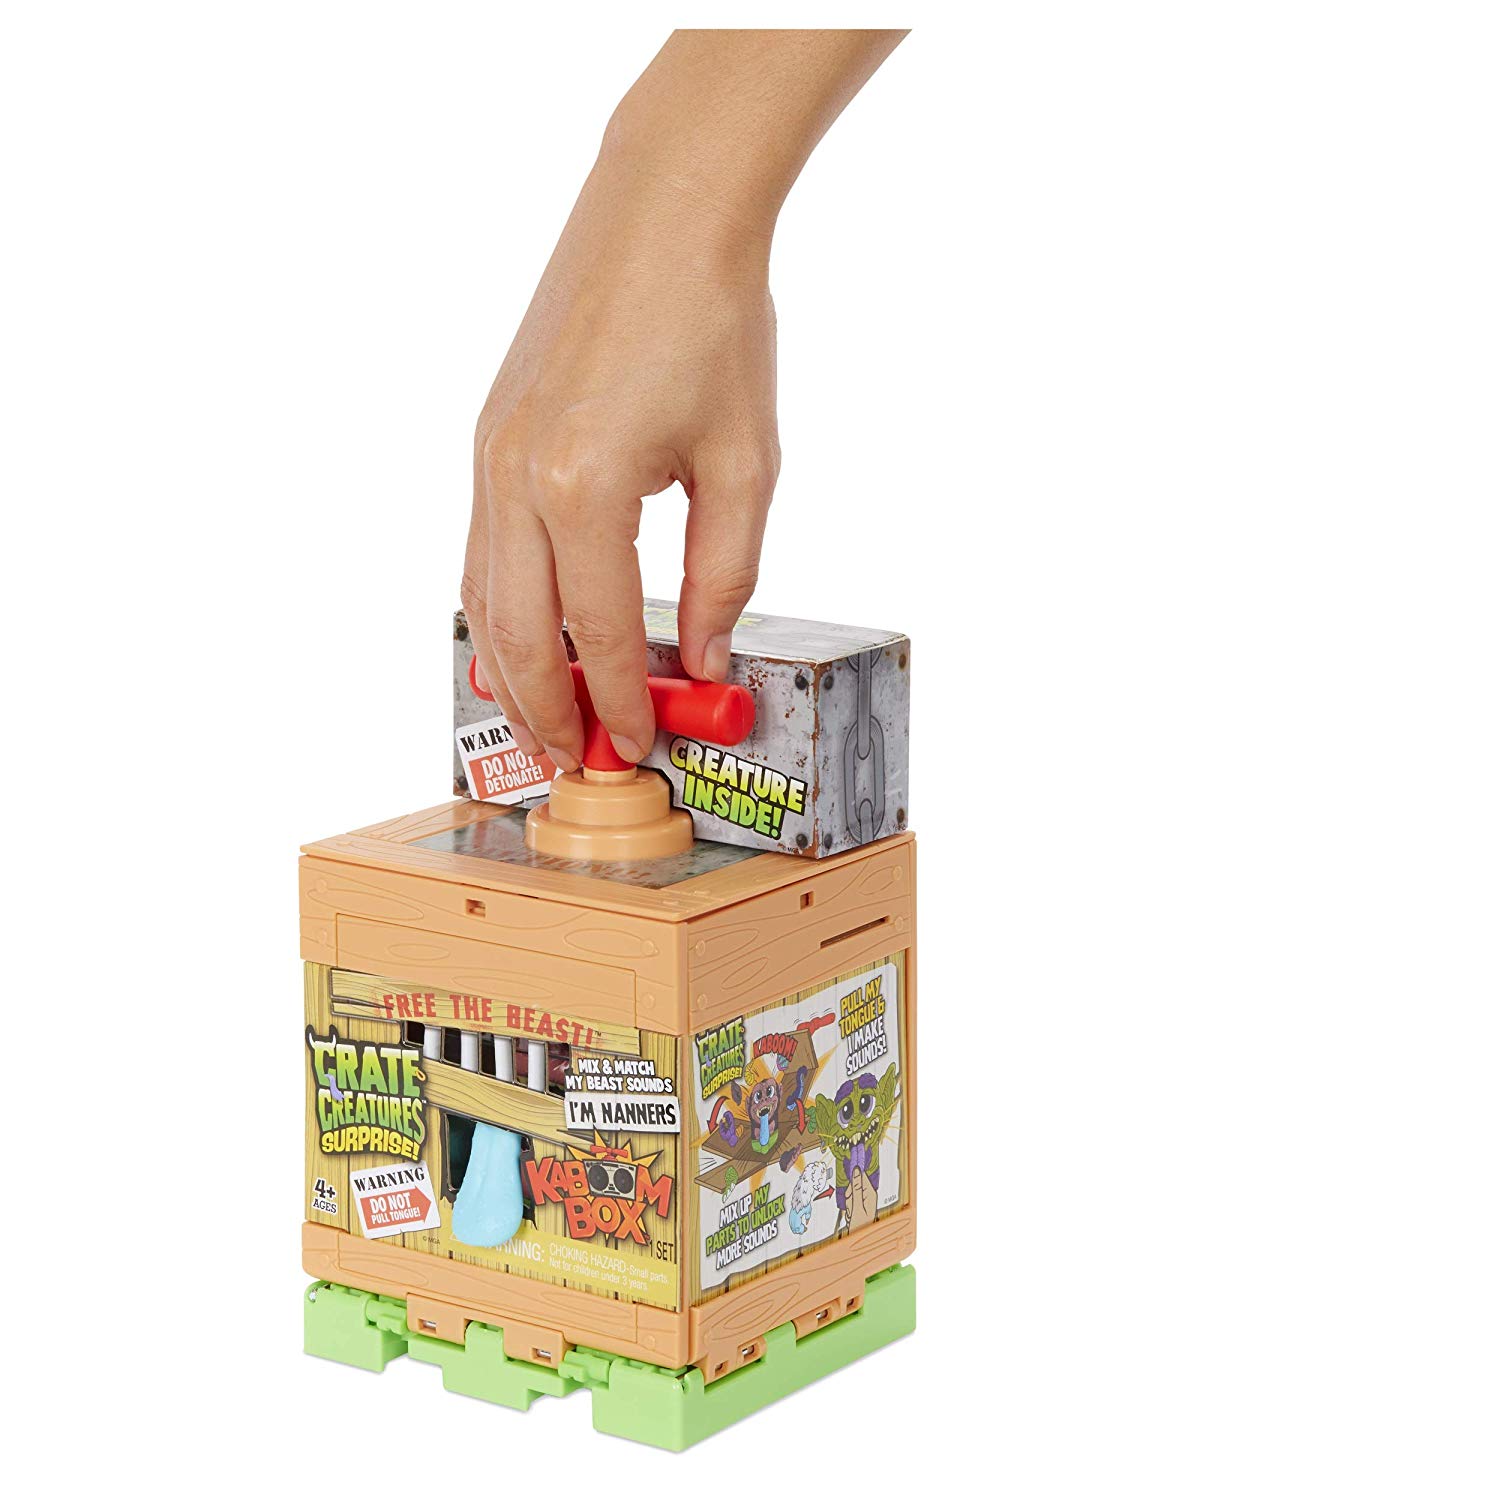 Crate Creatures Surprise Kaboom Box Nanners Brand New 